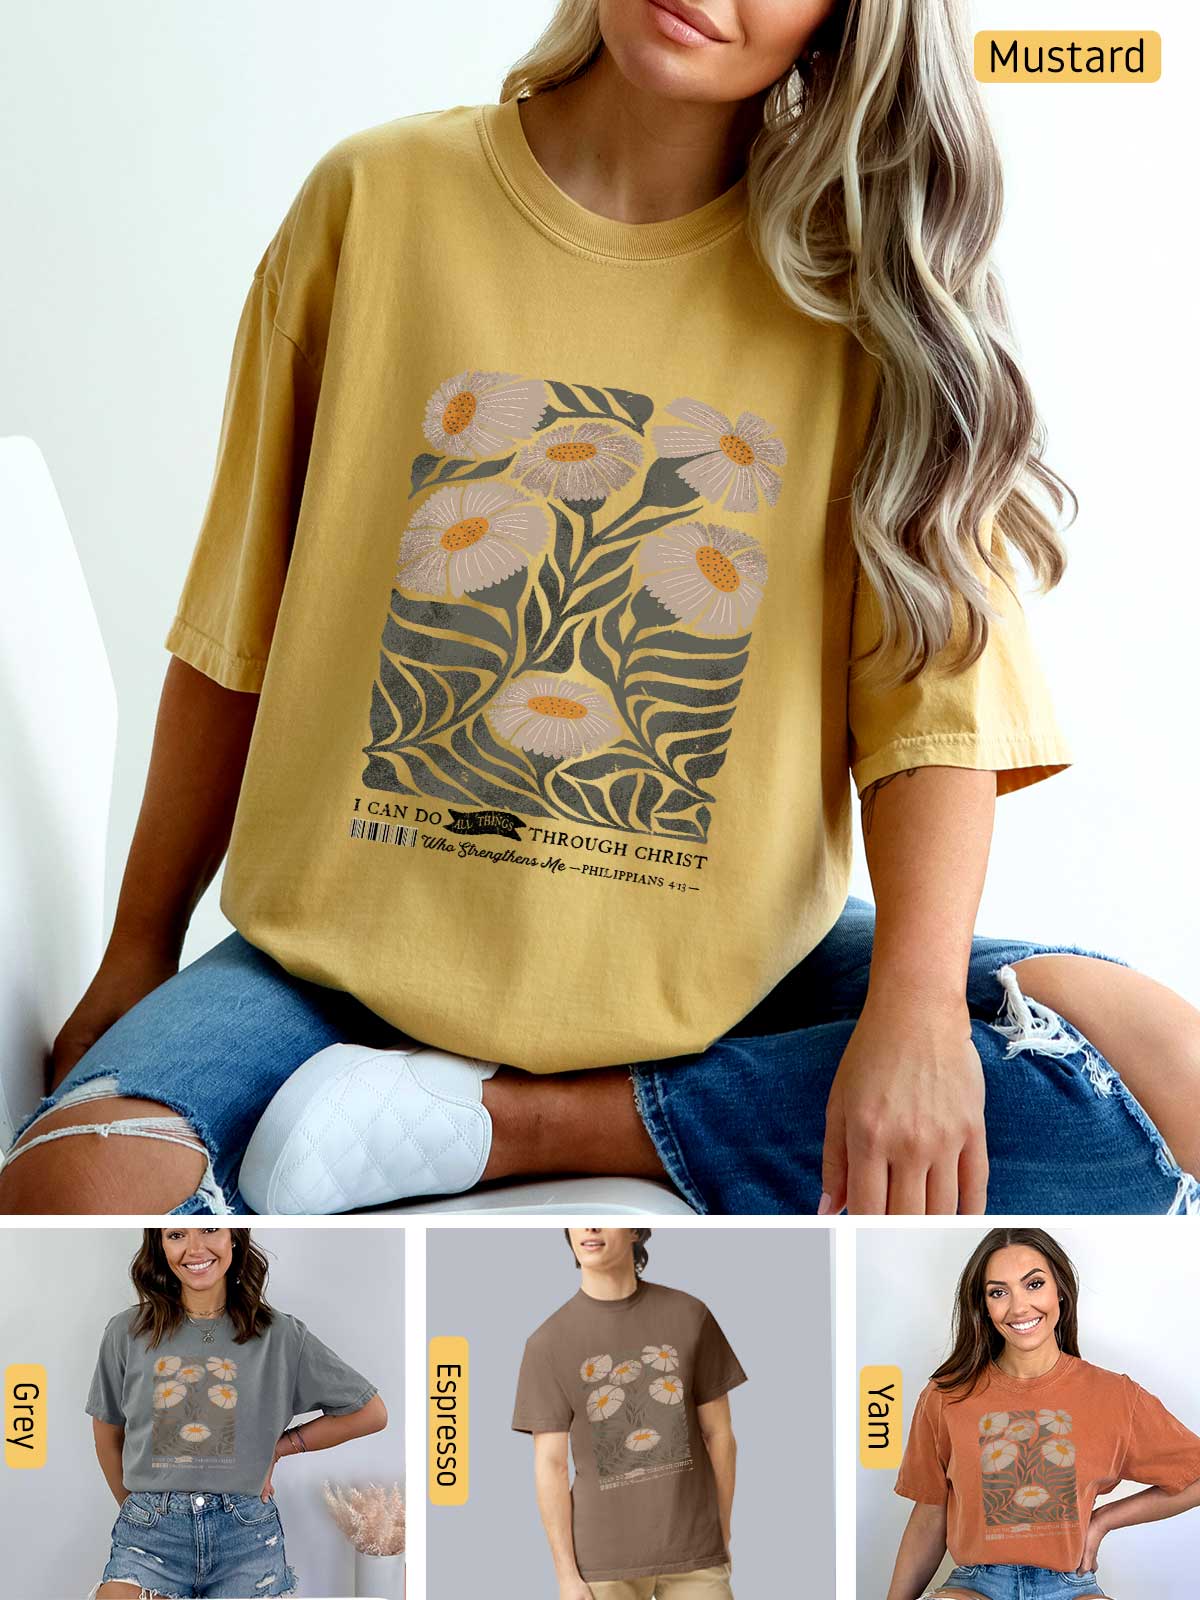 a woman wearing a mustard colored t - shirt with flowers on it